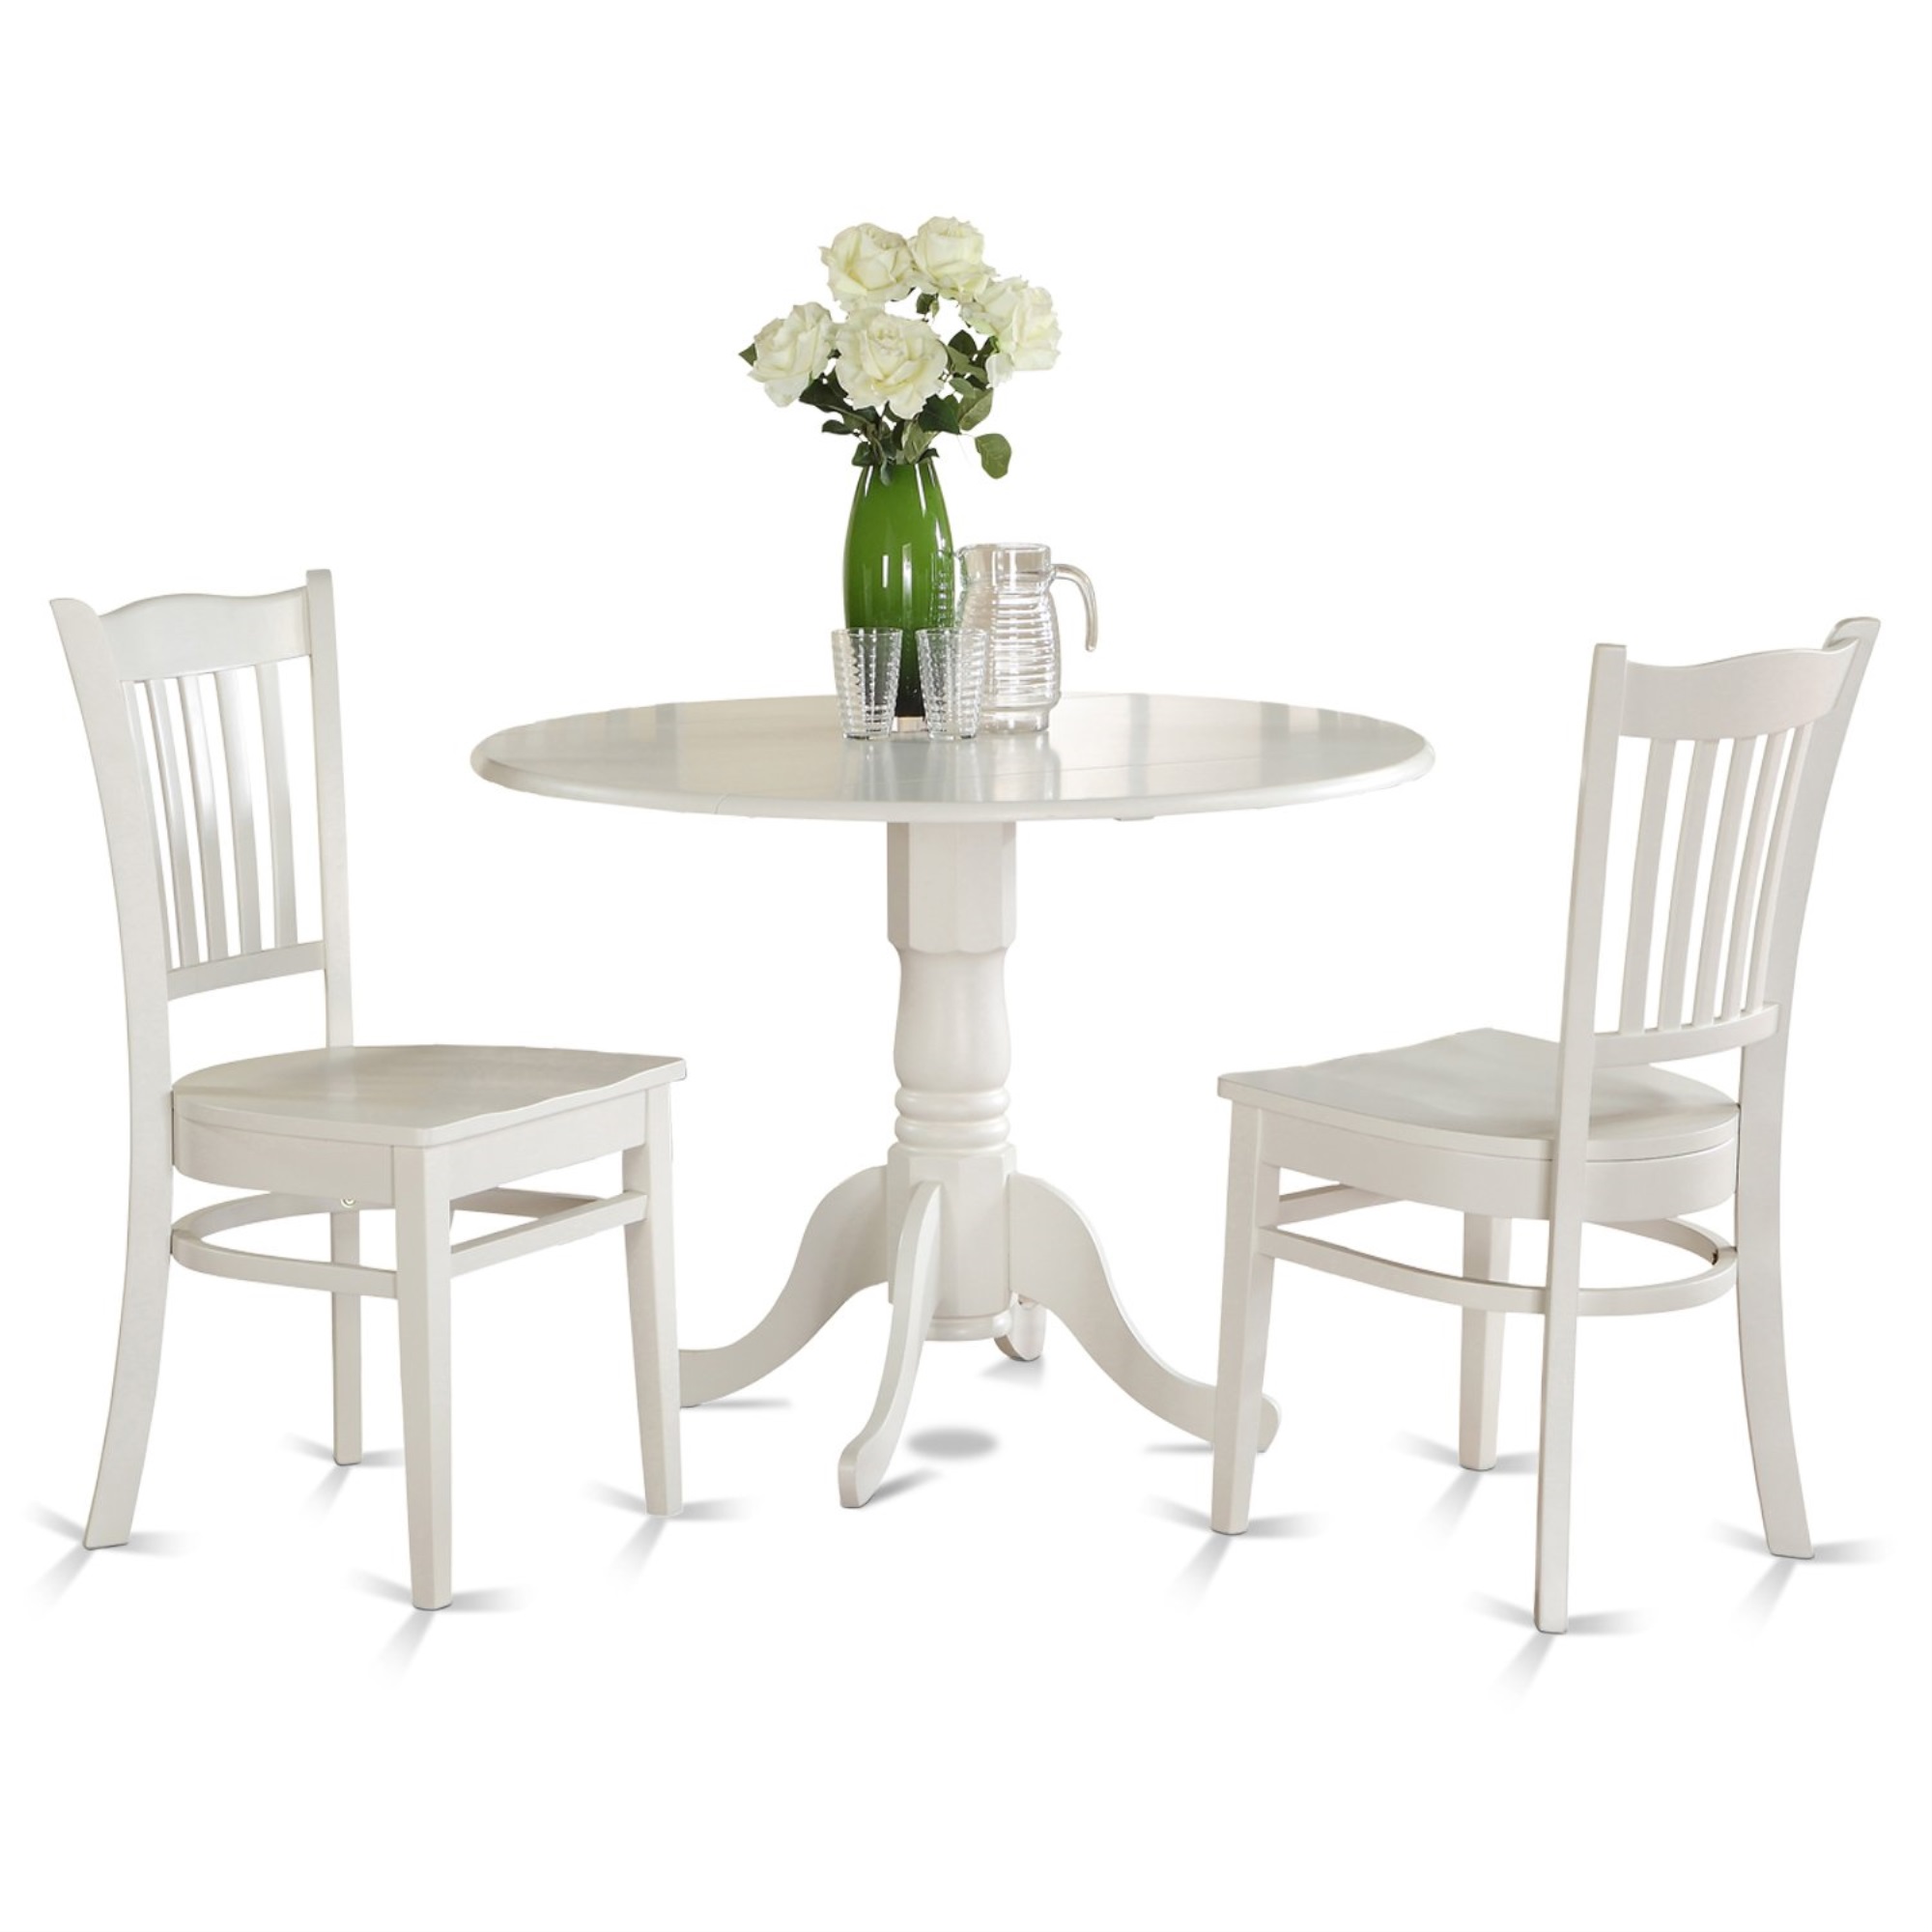 East West Furniture DLGR3-WHI-W 3 PC small Kitchen Table set-Kitchen Table and 2 Kitchen Chairs.